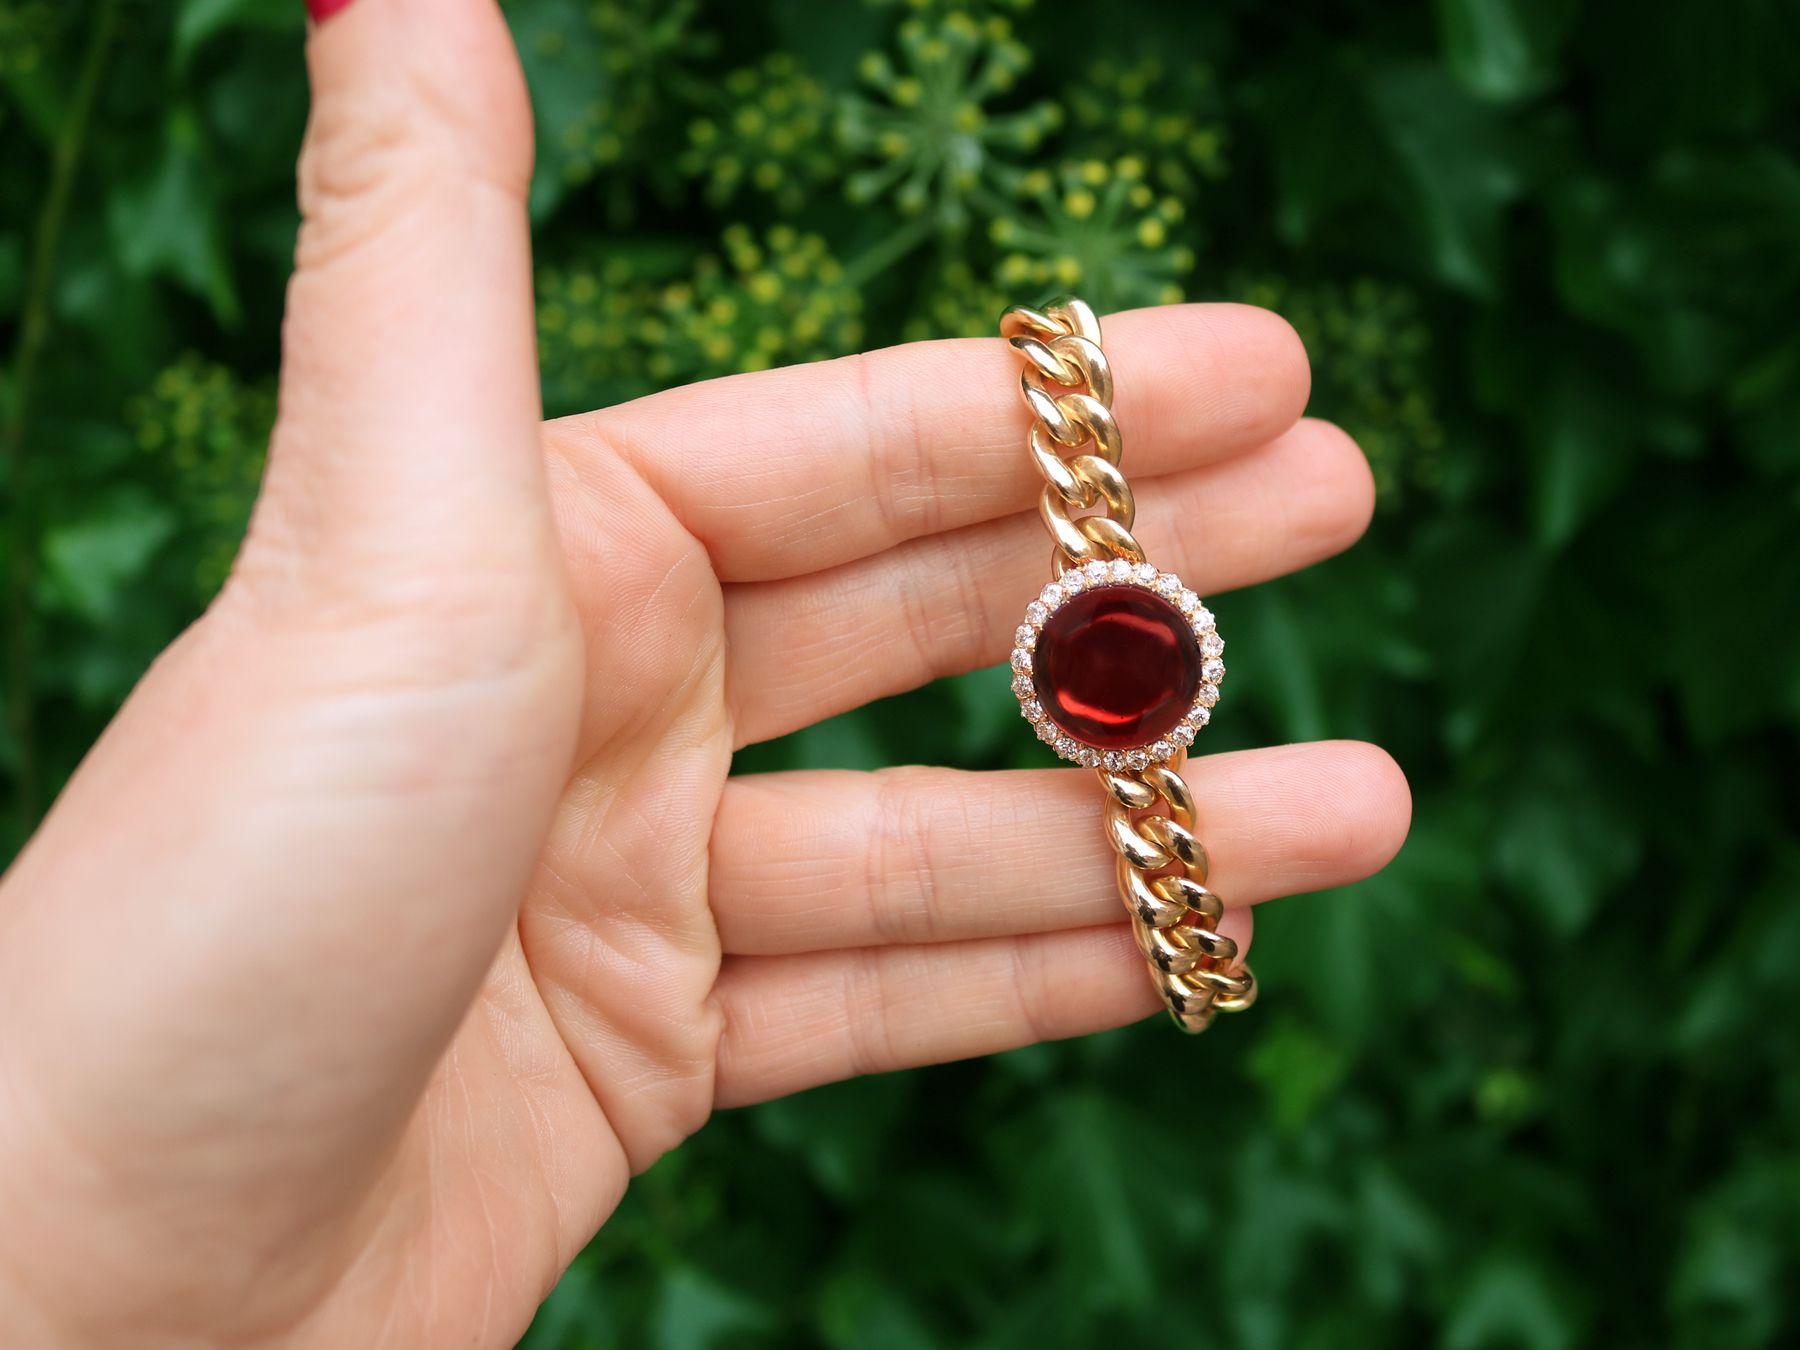 A stunning, fine and impressive antique Victorian 9.92 carat garnet and 1.07 carat diamond, 14 karat yellow gold bracelet; part of our bangle and bracelet collection.

This stunning antique cabochon cut bracelet has been crafted in 14k yellow